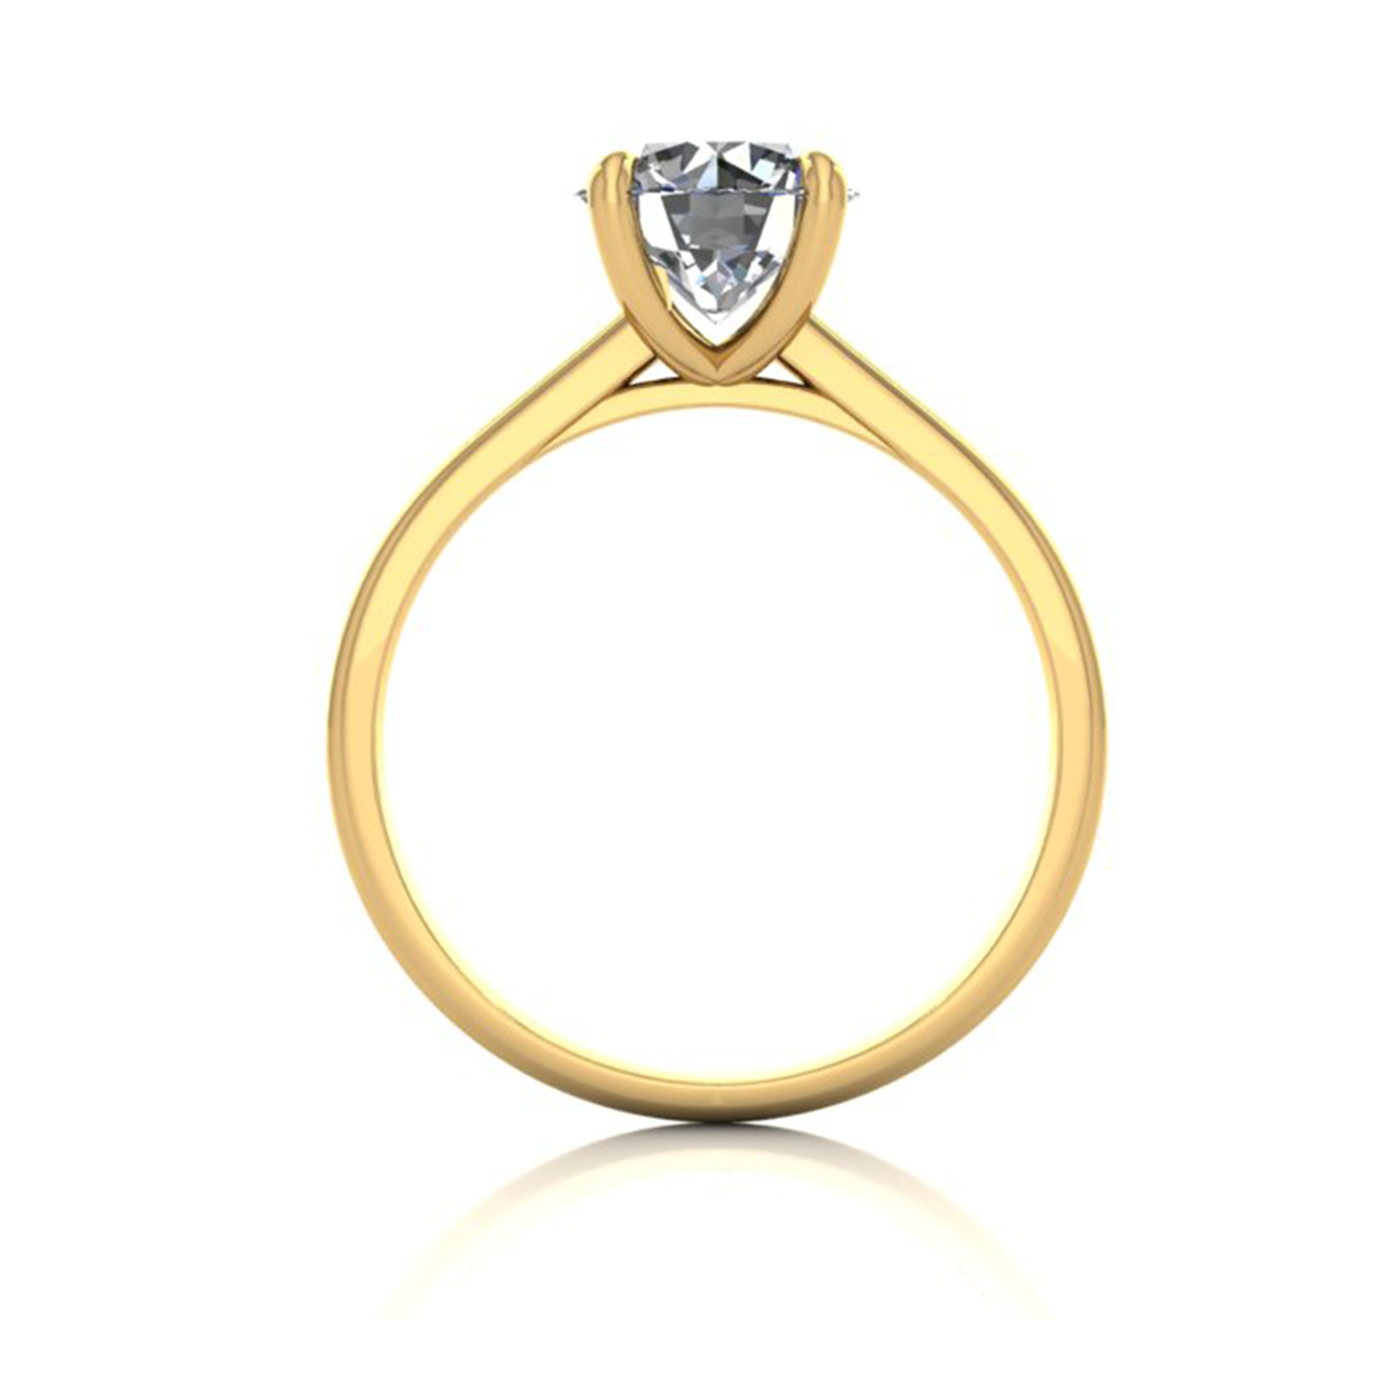 18k yellow gold 1.5ct 4 prongs solitaire round cut diamond engagement ring with whisper thin band